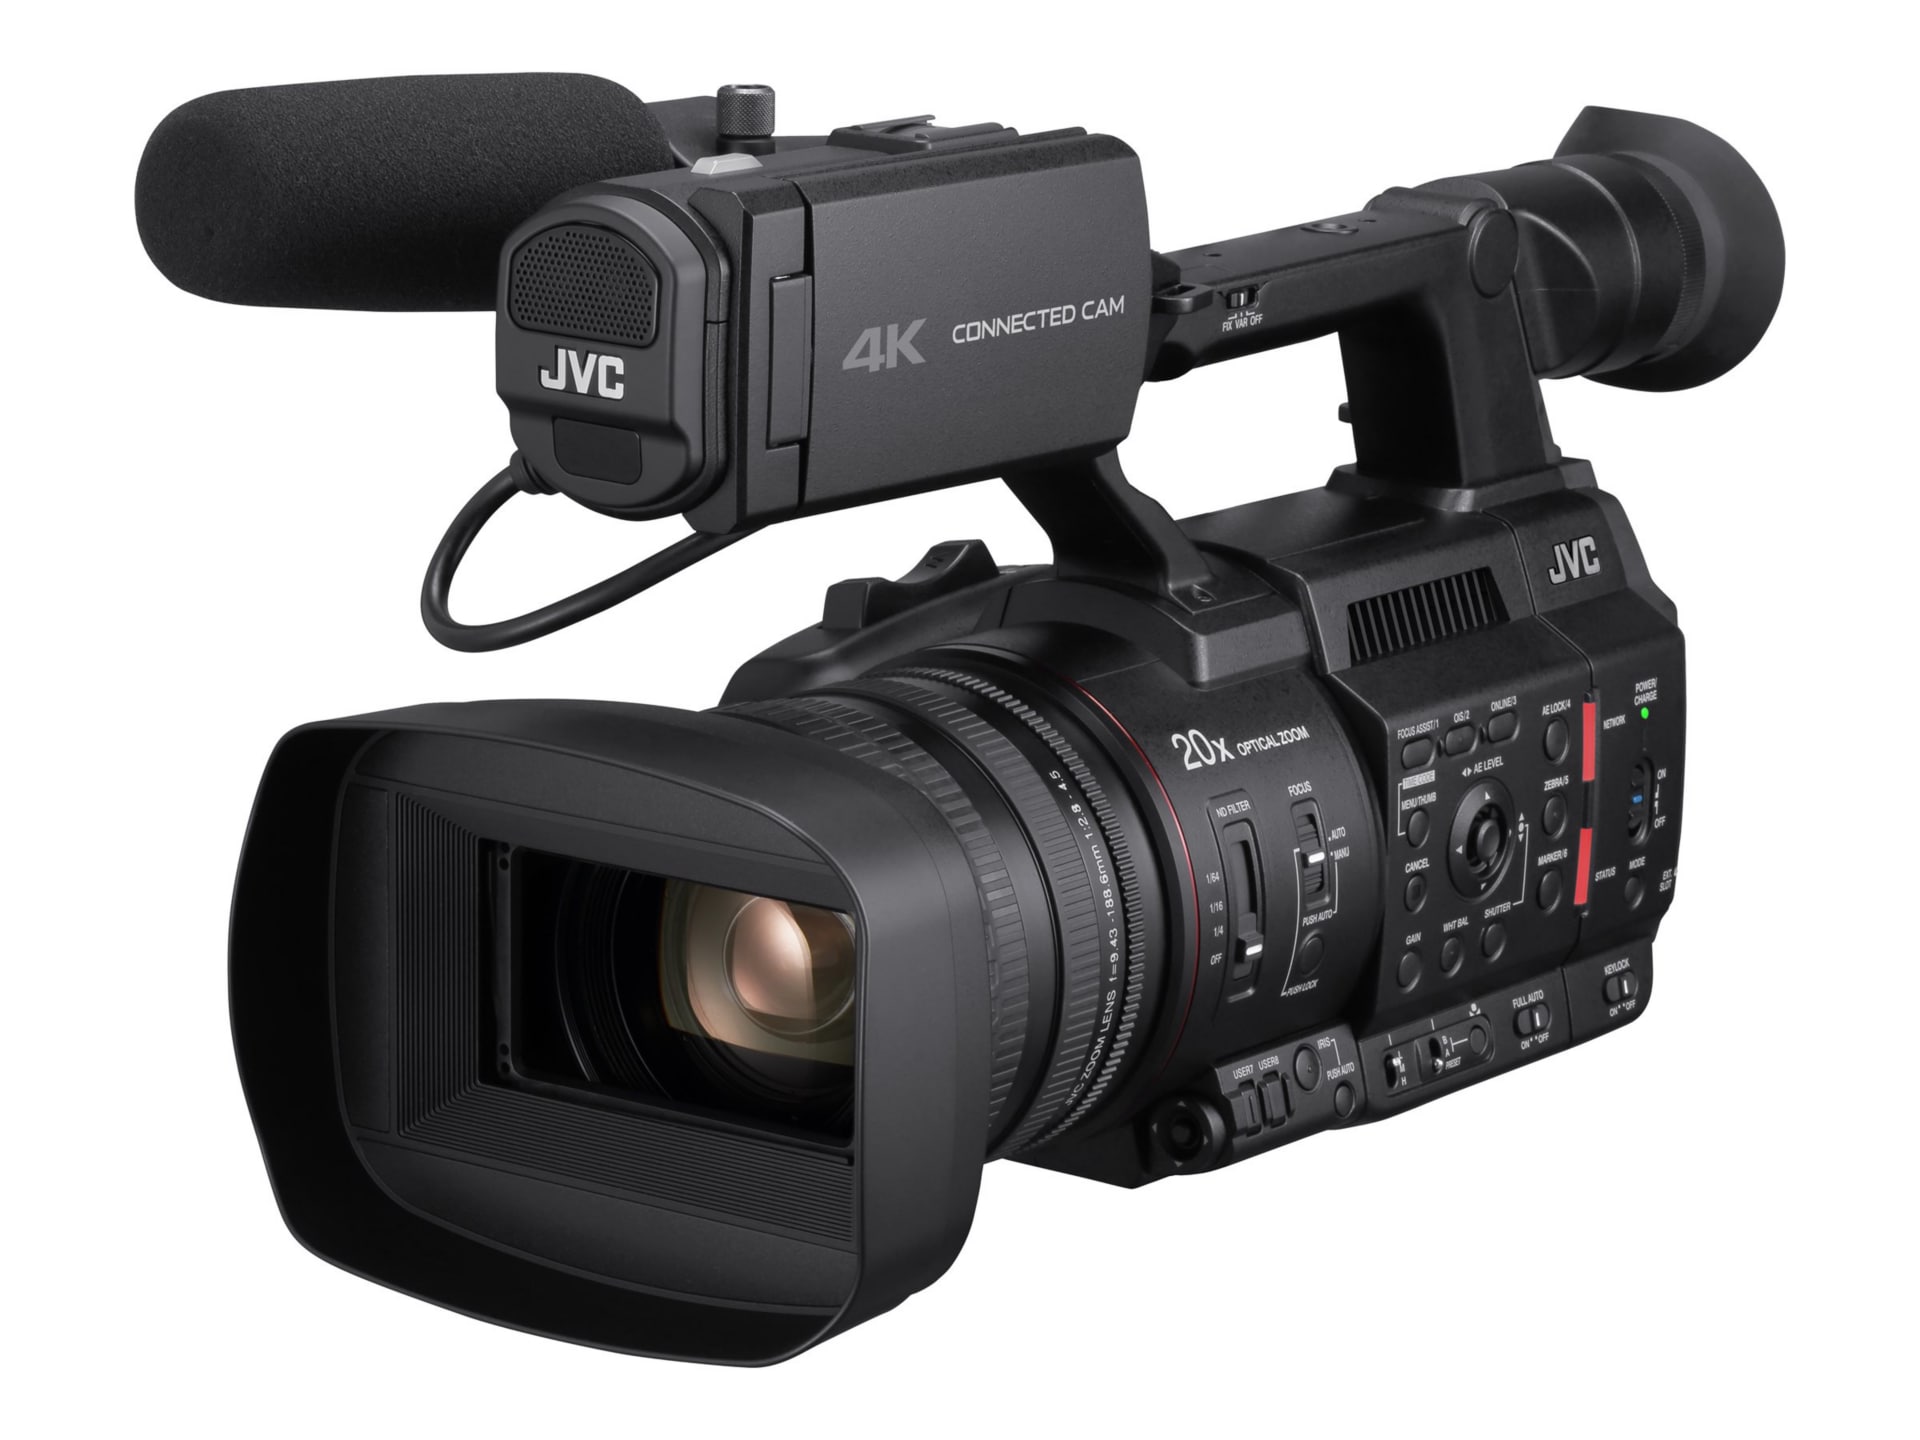 JVC CONNECTED CAM GY-HC500SPCN - camcorder - storage: flash card, solid state drive